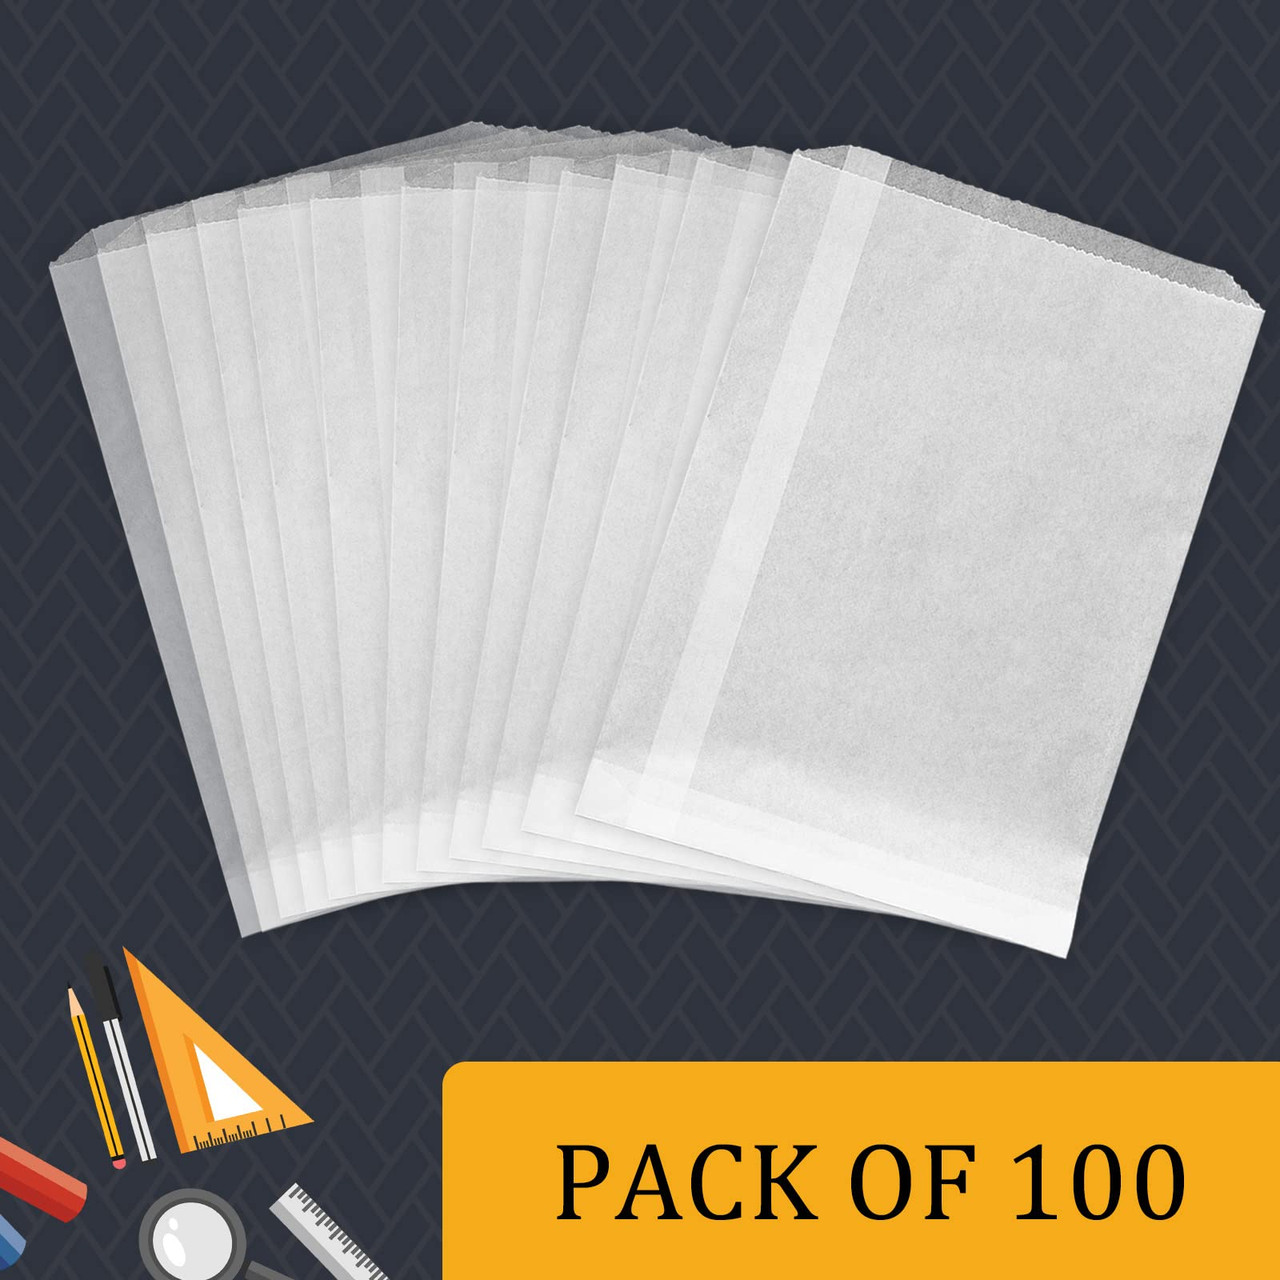 Lineco Glassine Photo Envelopes 5.25''x7.25'', Protect Photos, Prints,  Negatives. Air, Water, Dust, Grease Resistant